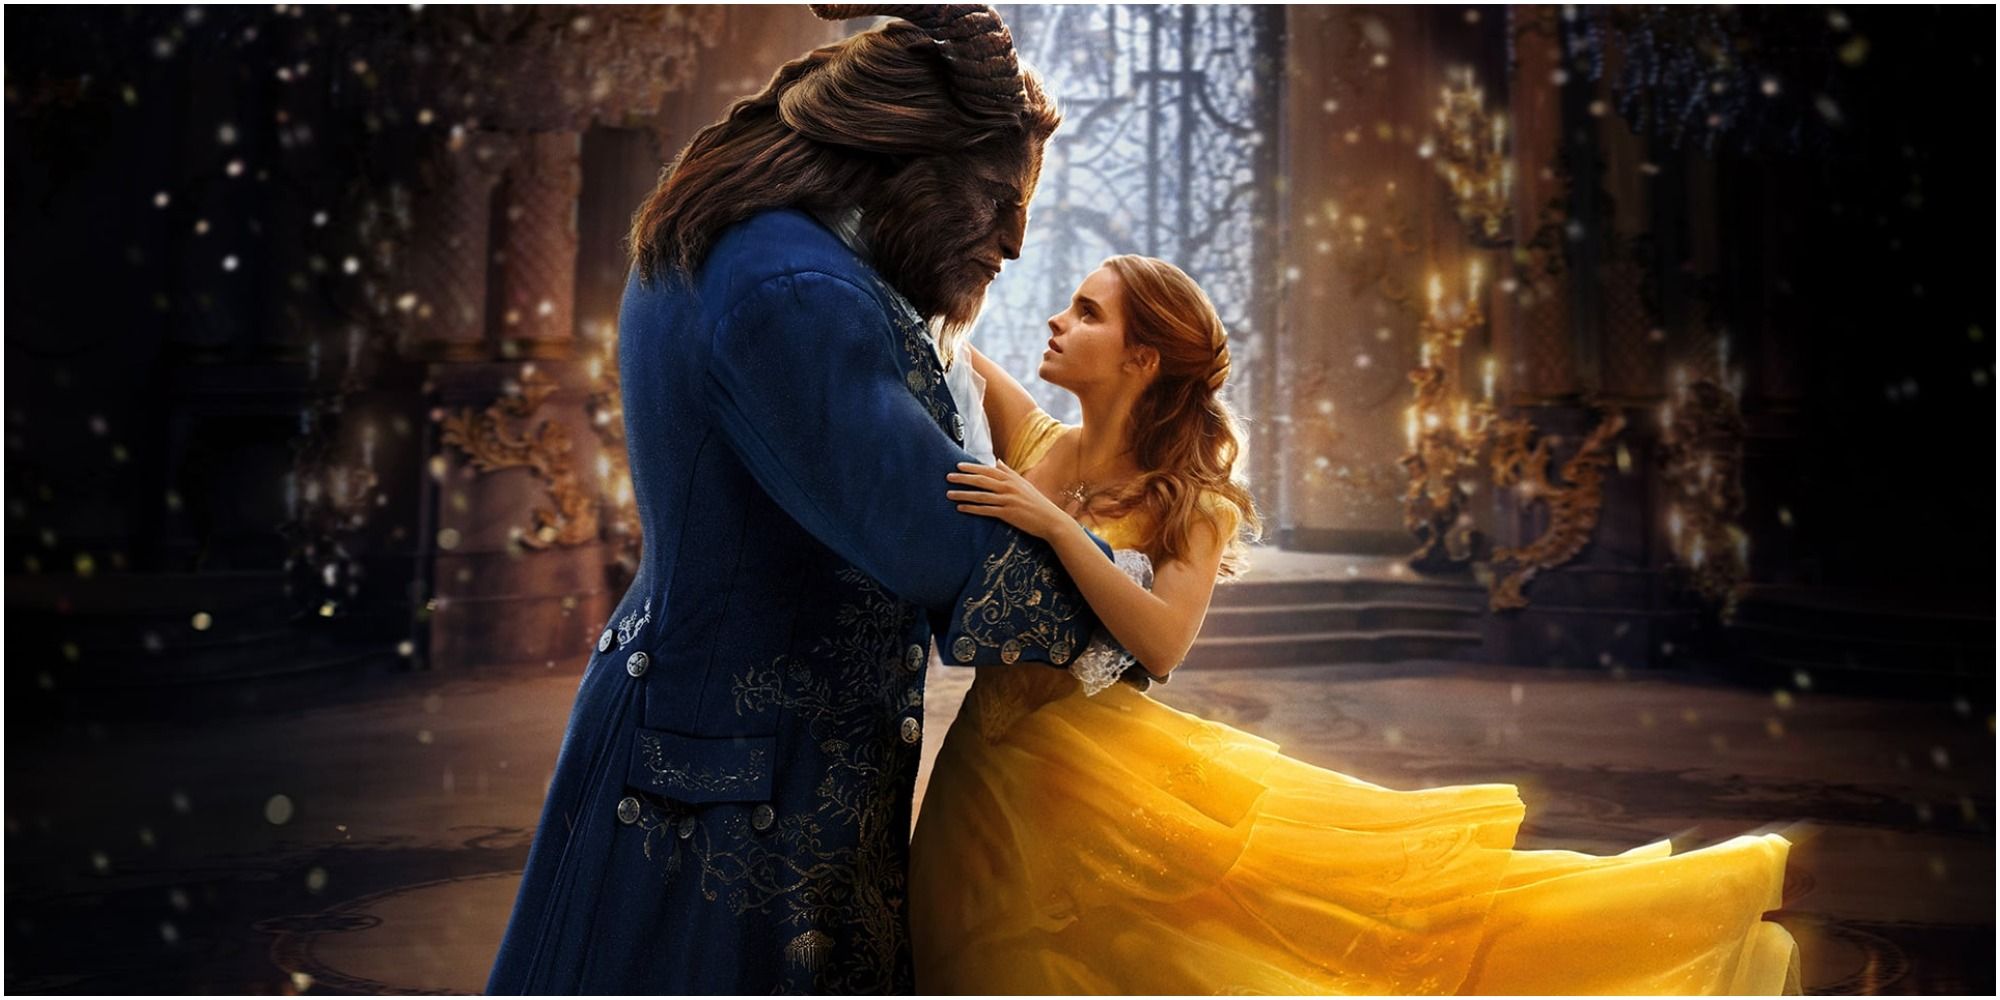 Belle and the Beast dancing in beauty and the beast